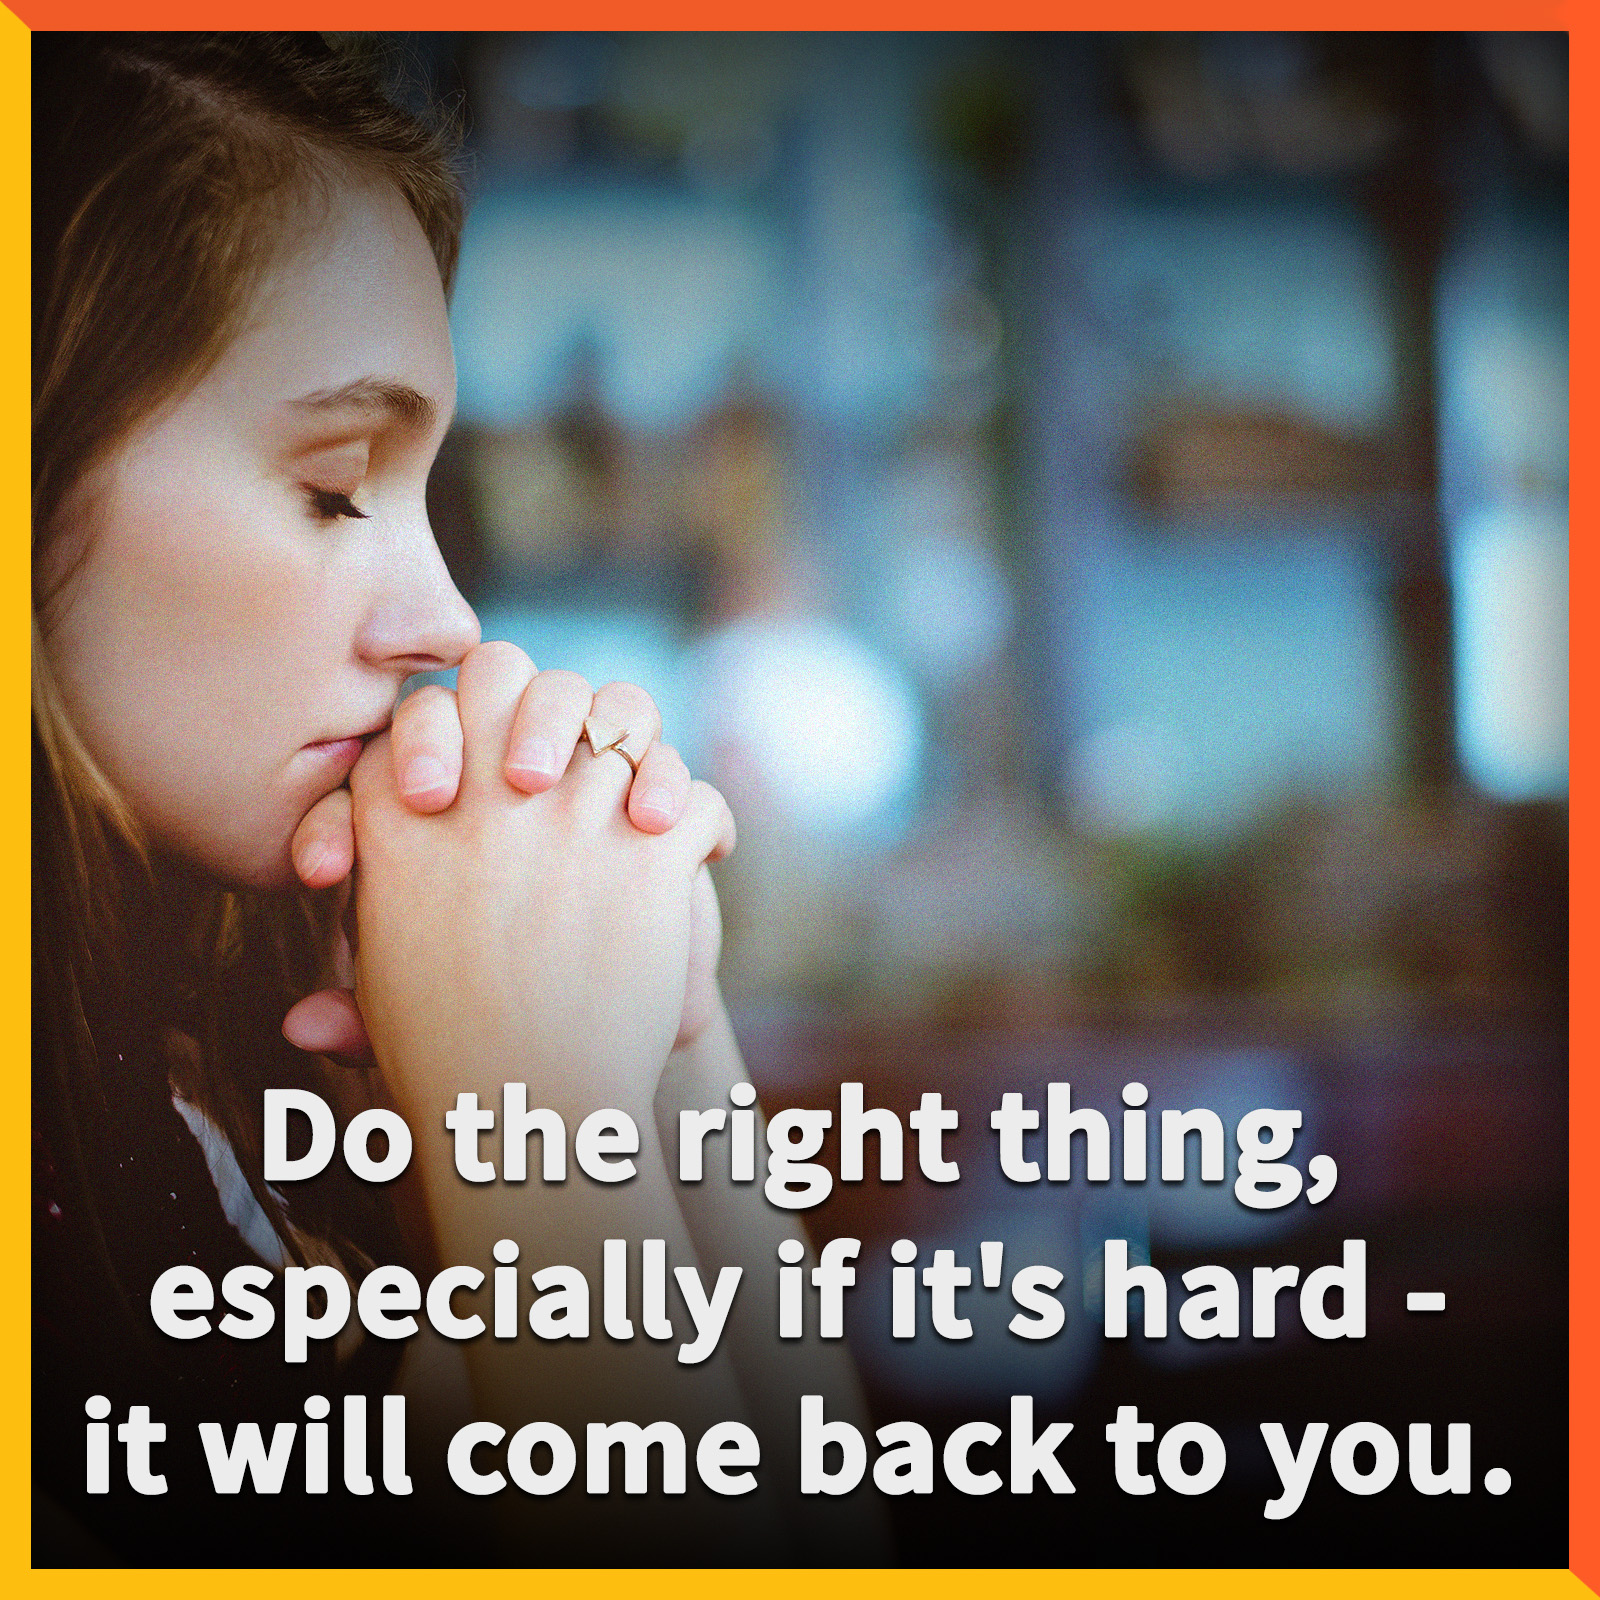 Do the Right Thing, especially if it's hard - it will come back to you.